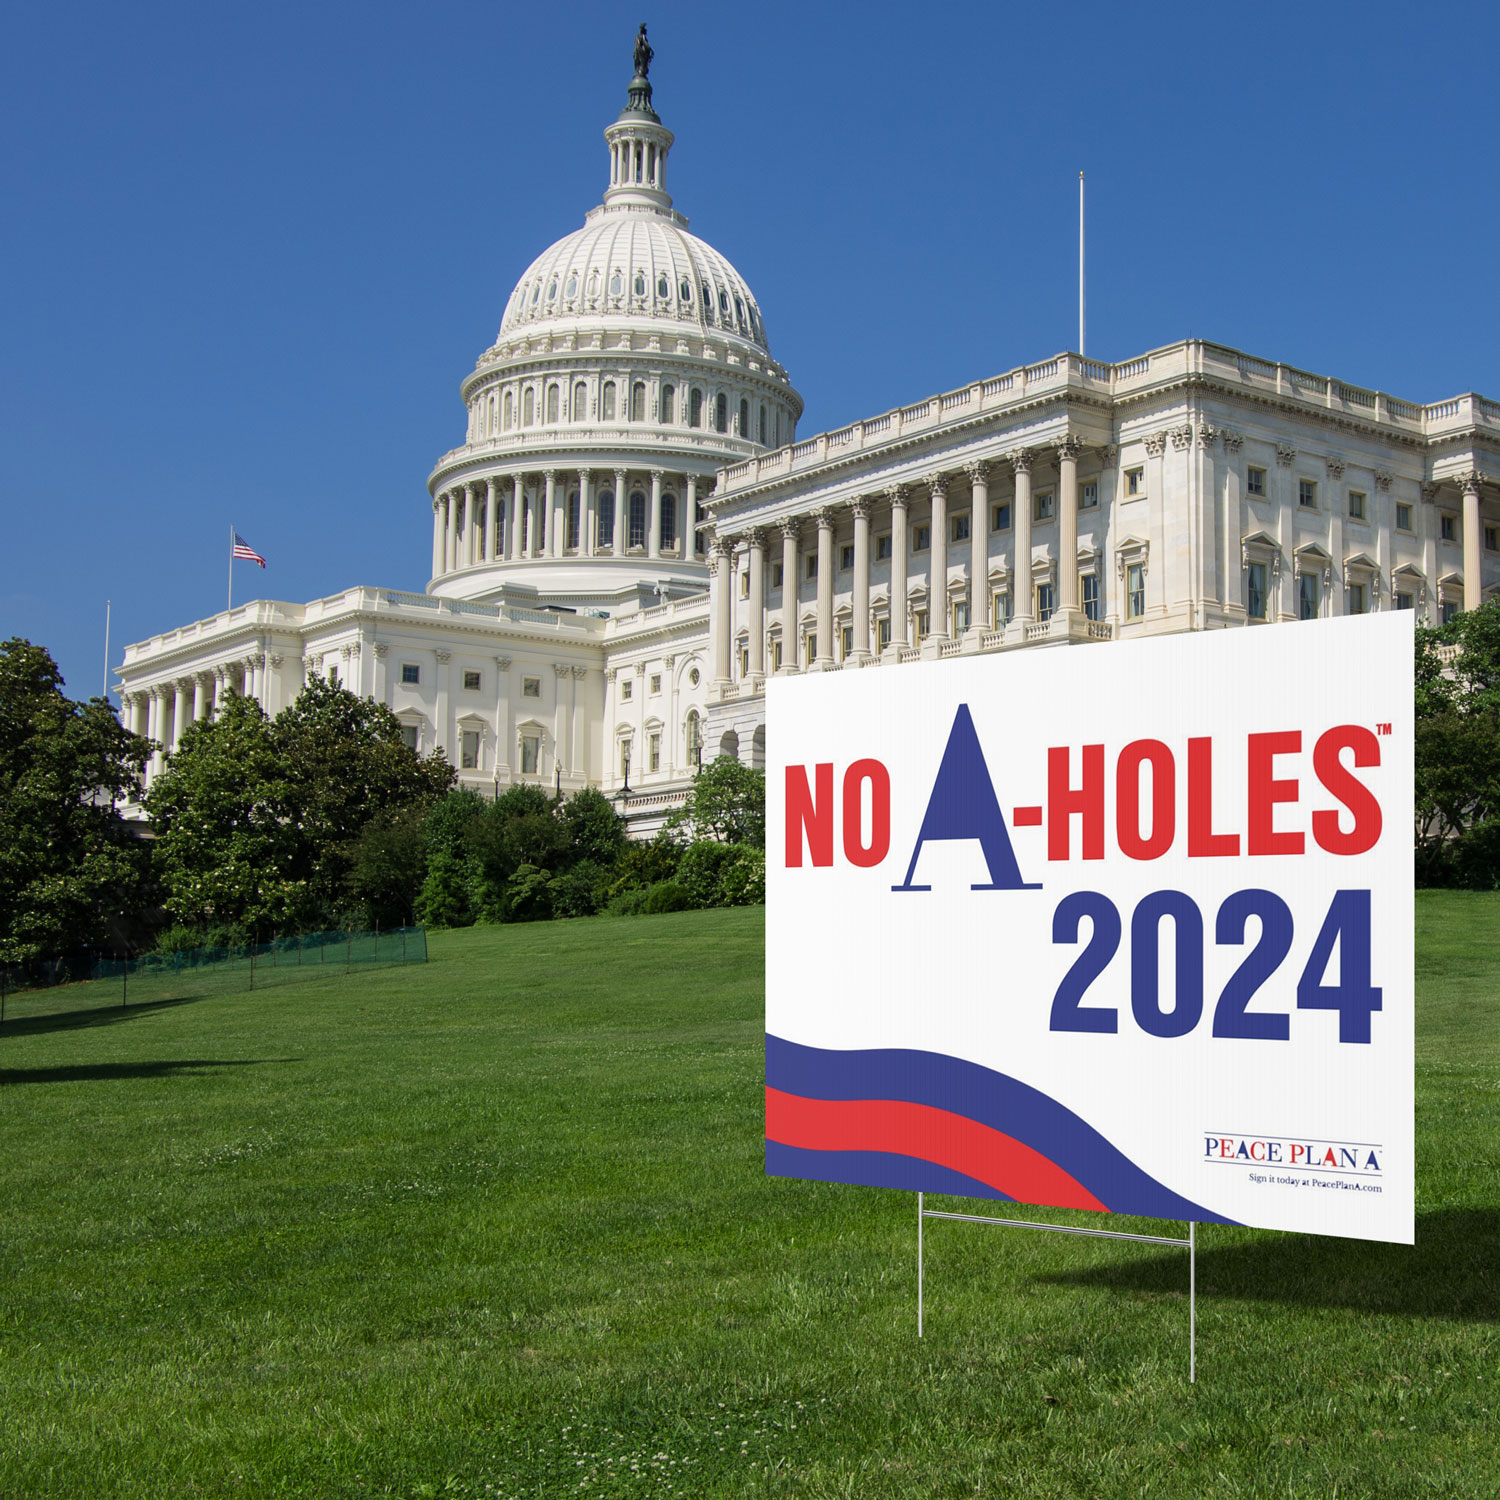 No A-Holes 2024 in the U.S. election for president, congress, and state and local officials.